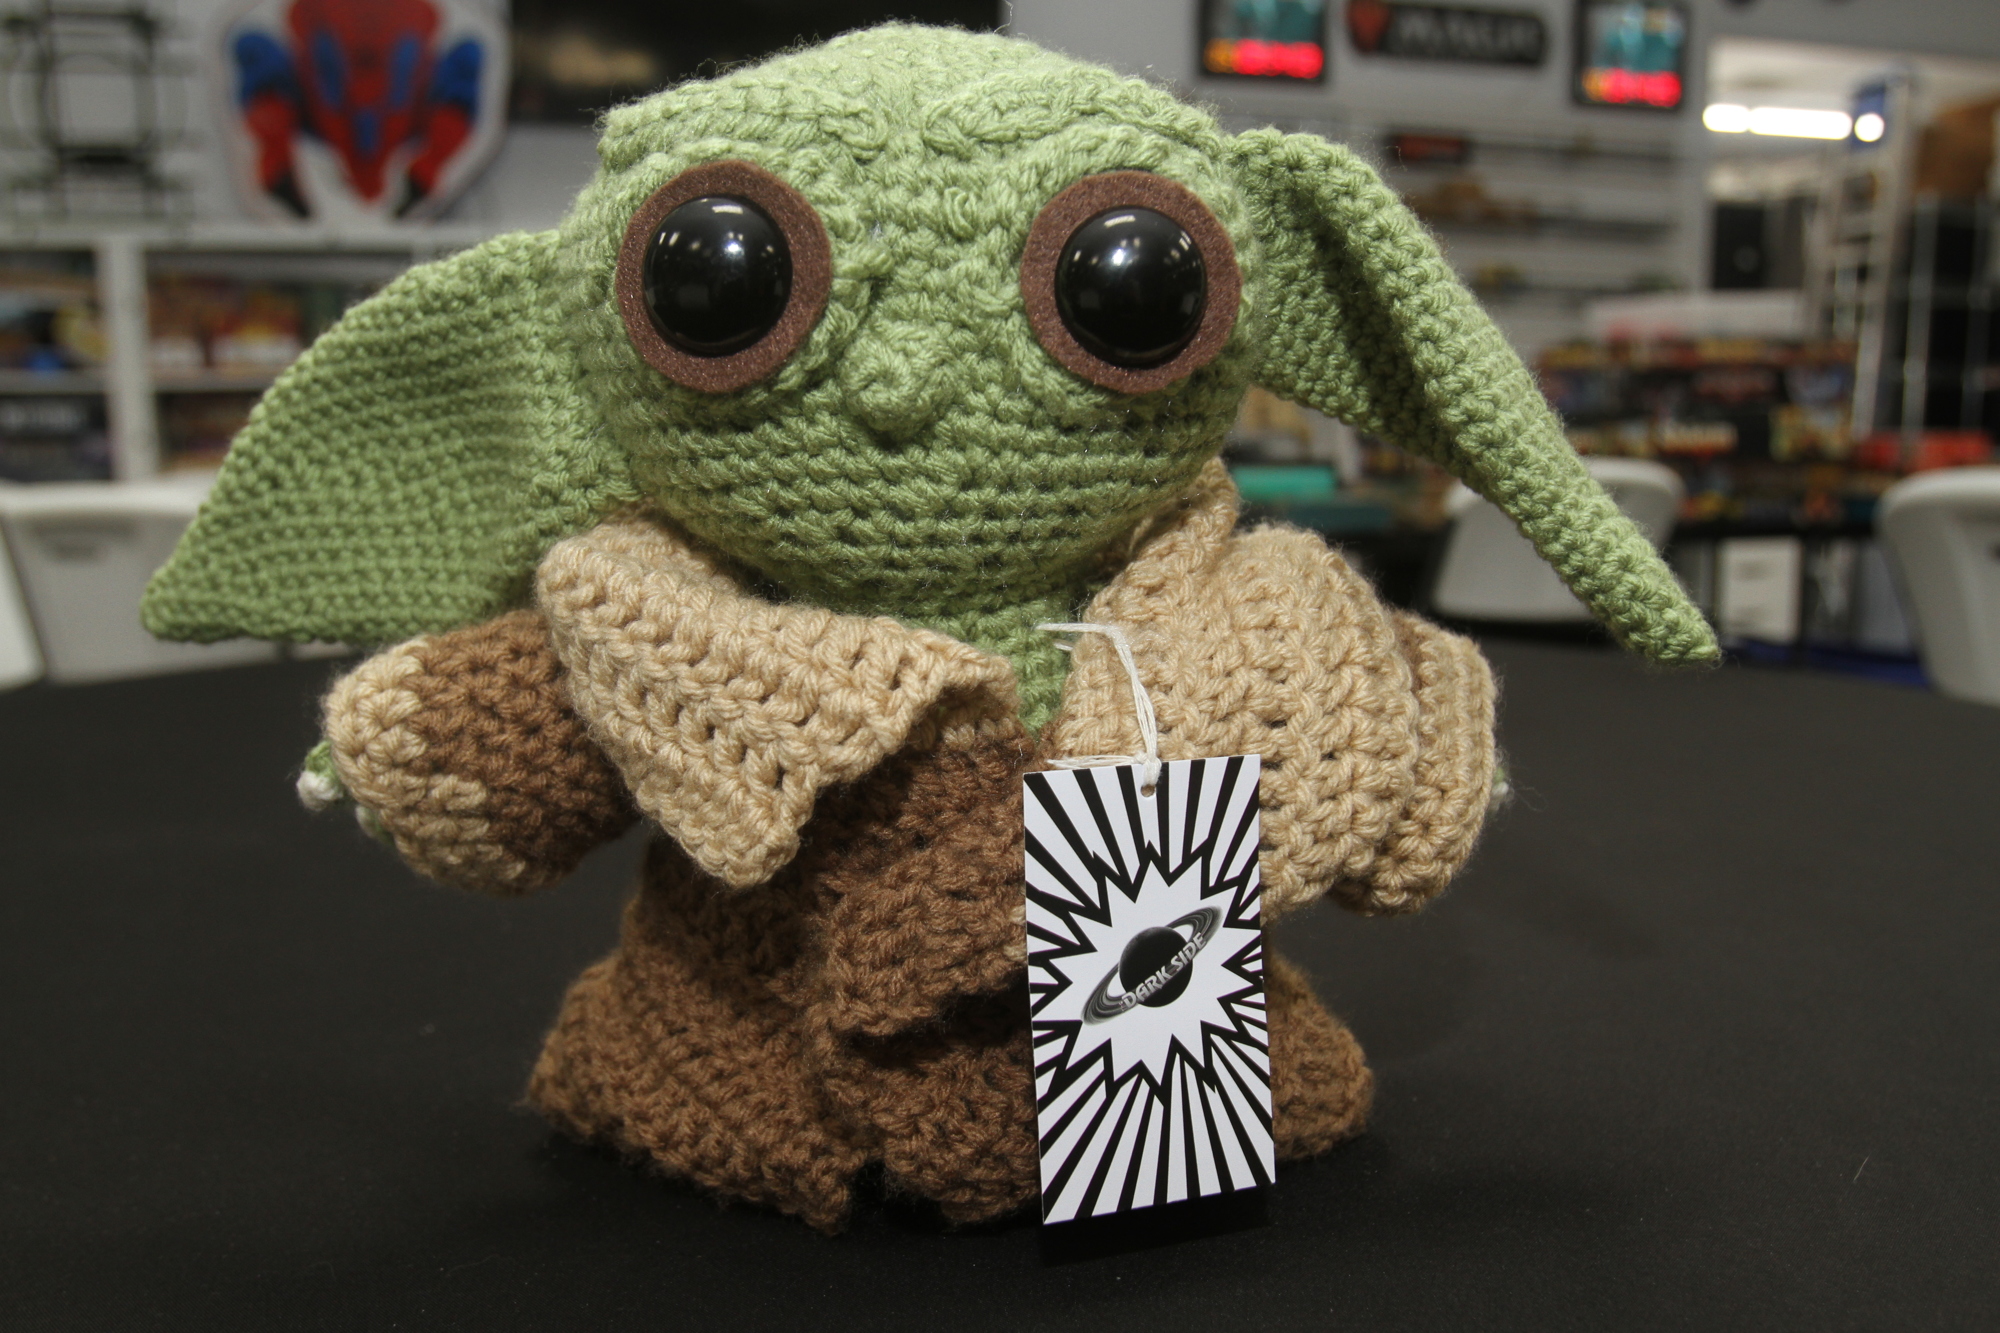 Baby Yoda is a more popular item.